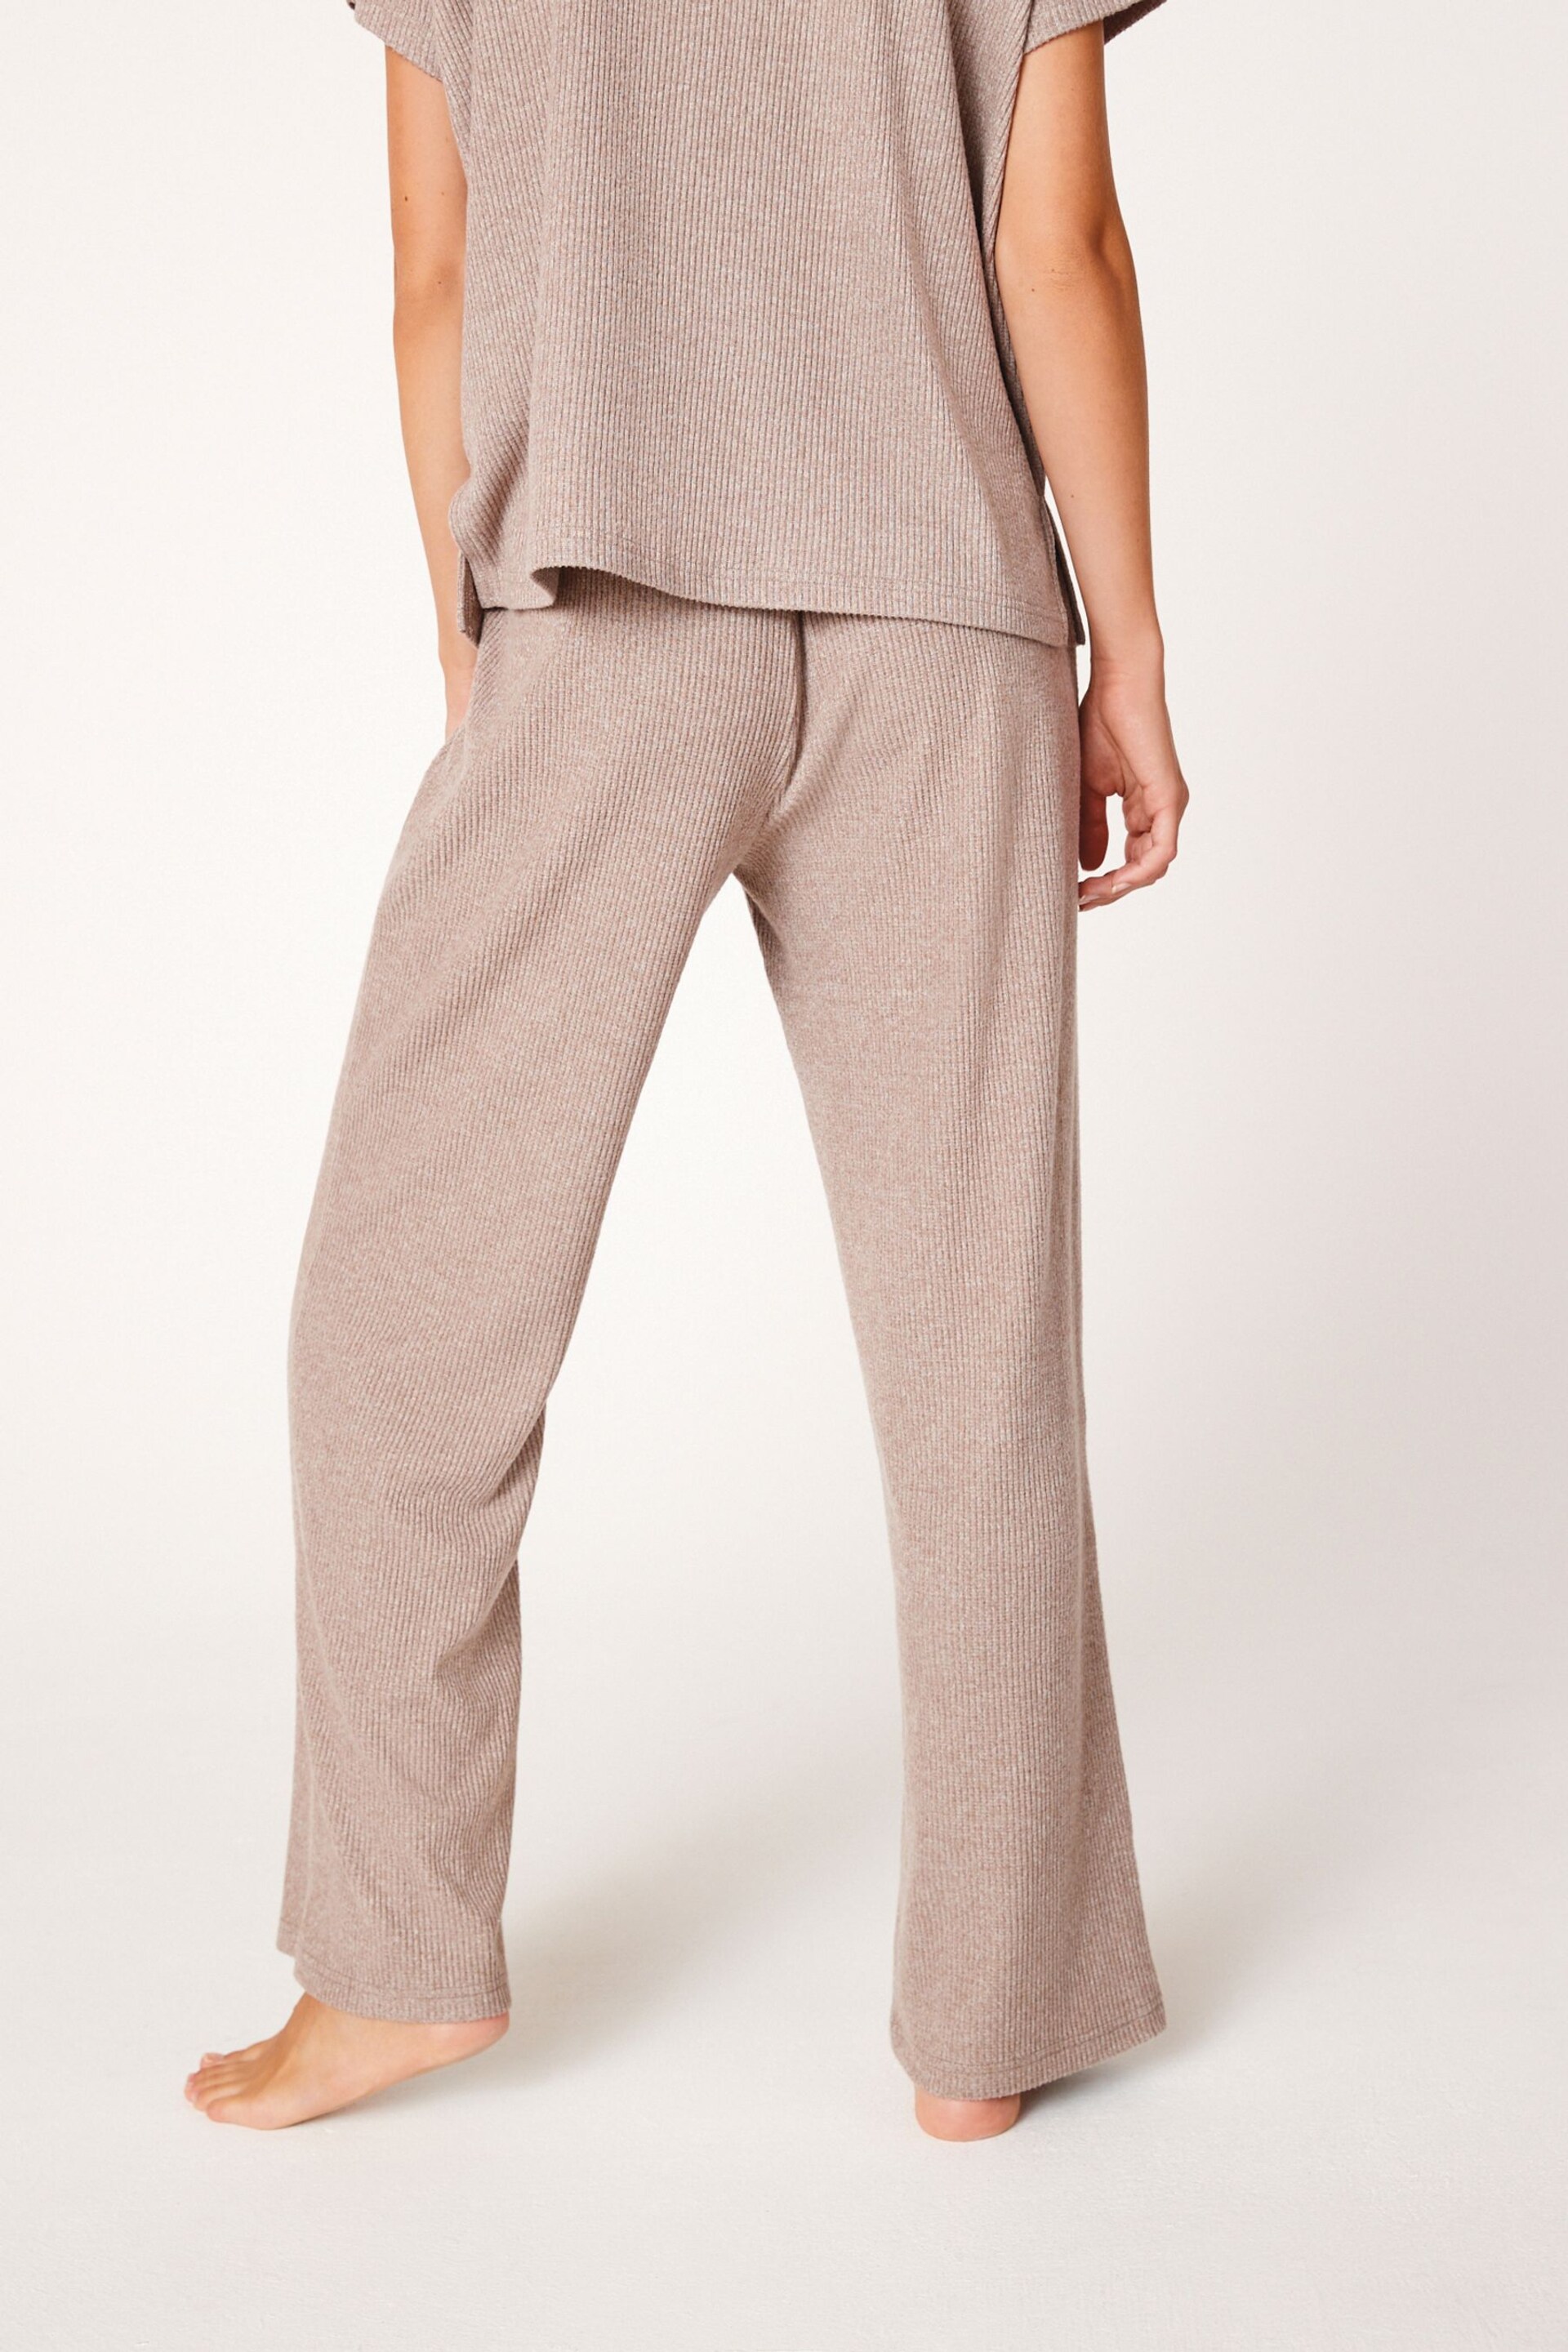 B by Ted Baker Rib Loungewear Trousers - Image 1 of 3